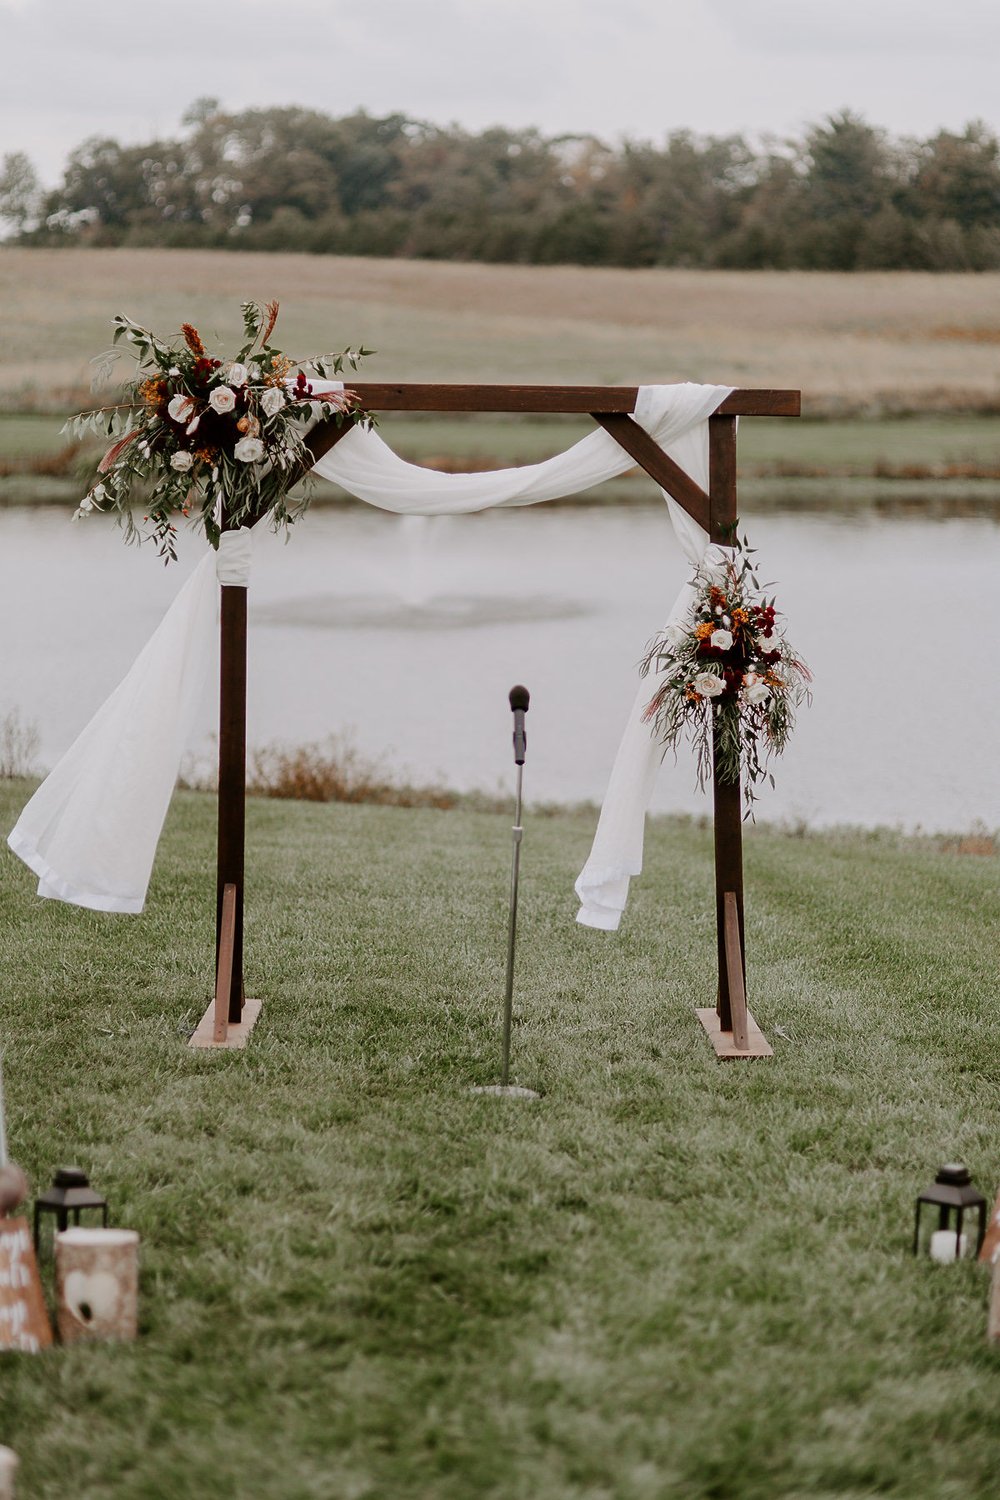 Wedding arch decorated with florals at outdoor wedding